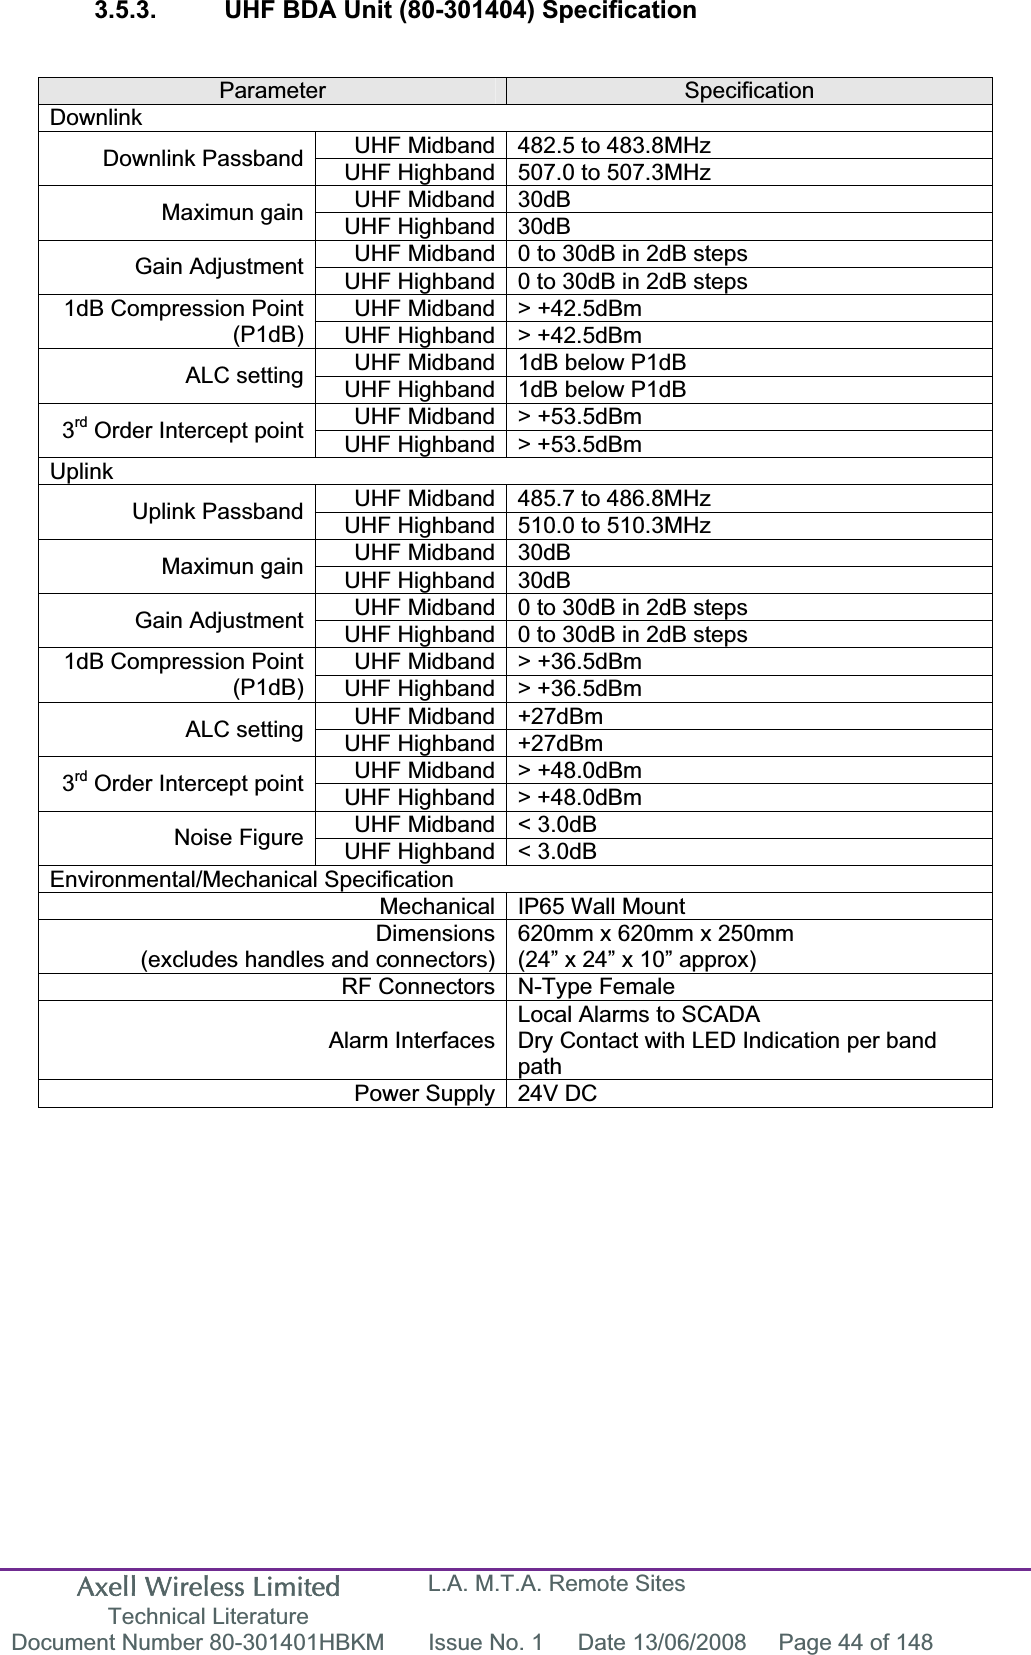 Axell Wireless Limited Technical Literature L.A. M.T.A. Remote Sites Document Number 80-301401HBKM  Issue No. 1  Date 13/06/2008  Page 44 of 148 3.5.3.  UHF BDA Unit (80-301404) SpecificationParameter SpecificationDownlinkUHF Midband 482.5 to 483.8MHz Downlink Passband  UHF Highband 507.0 to 507.3MHz UHF Midband 30dB Maximun gain  UHF Highband 30dB UHF Midband 0 to 30dB in 2dB steps Gain Adjustment  UHF Highband 0 to 30dB in 2dB steps UHF Midband &gt; +42.5dBm 1dB Compression Point (P1dB) UHF Highband &gt; +42.5dBm UHF Midband 1dB below P1dB ALC setting  UHF Highband 1dB below P1dB UHF Midband &gt; +53.5dBm 3rd Order Intercept point  UHF Highband &gt; +53.5dBm UplinkUHF Midband 485.7 to 486.8MHzUplink Passband  UHF Highband 510.0 to 510.3MHz UHF Midband 30dB Maximun gain  UHF Highband 30dB UHF Midband 0 to 30dB in 2dB steps Gain Adjustment  UHF Highband 0 to 30dB in 2dB steps UHF Midband &gt; +36.5dBm 1dB Compression Point (P1dB) UHF Highband &gt; +36.5dBm UHF Midband +27dBm ALC setting  UHF Highband +27dBm UHF Midband &gt; +48.0dBm 3rd Order Intercept point  UHF Highband &gt; +48.0dBm UHF Midband &lt; 3.0dB Noise Figure  UHF Highband &lt; 3.0dB Environmental/Mechanical SpecificationMechanical IP65 Wall Mount  Dimensions(excludes handles and connectors)620mm x 620mm x 250mm (24” x 24” x 10” approx) RF Connectors N-Type Female  Alarm InterfacesLocal Alarms to SCADADry Contact with LED Indication per band pathPower Supply 24V DC 